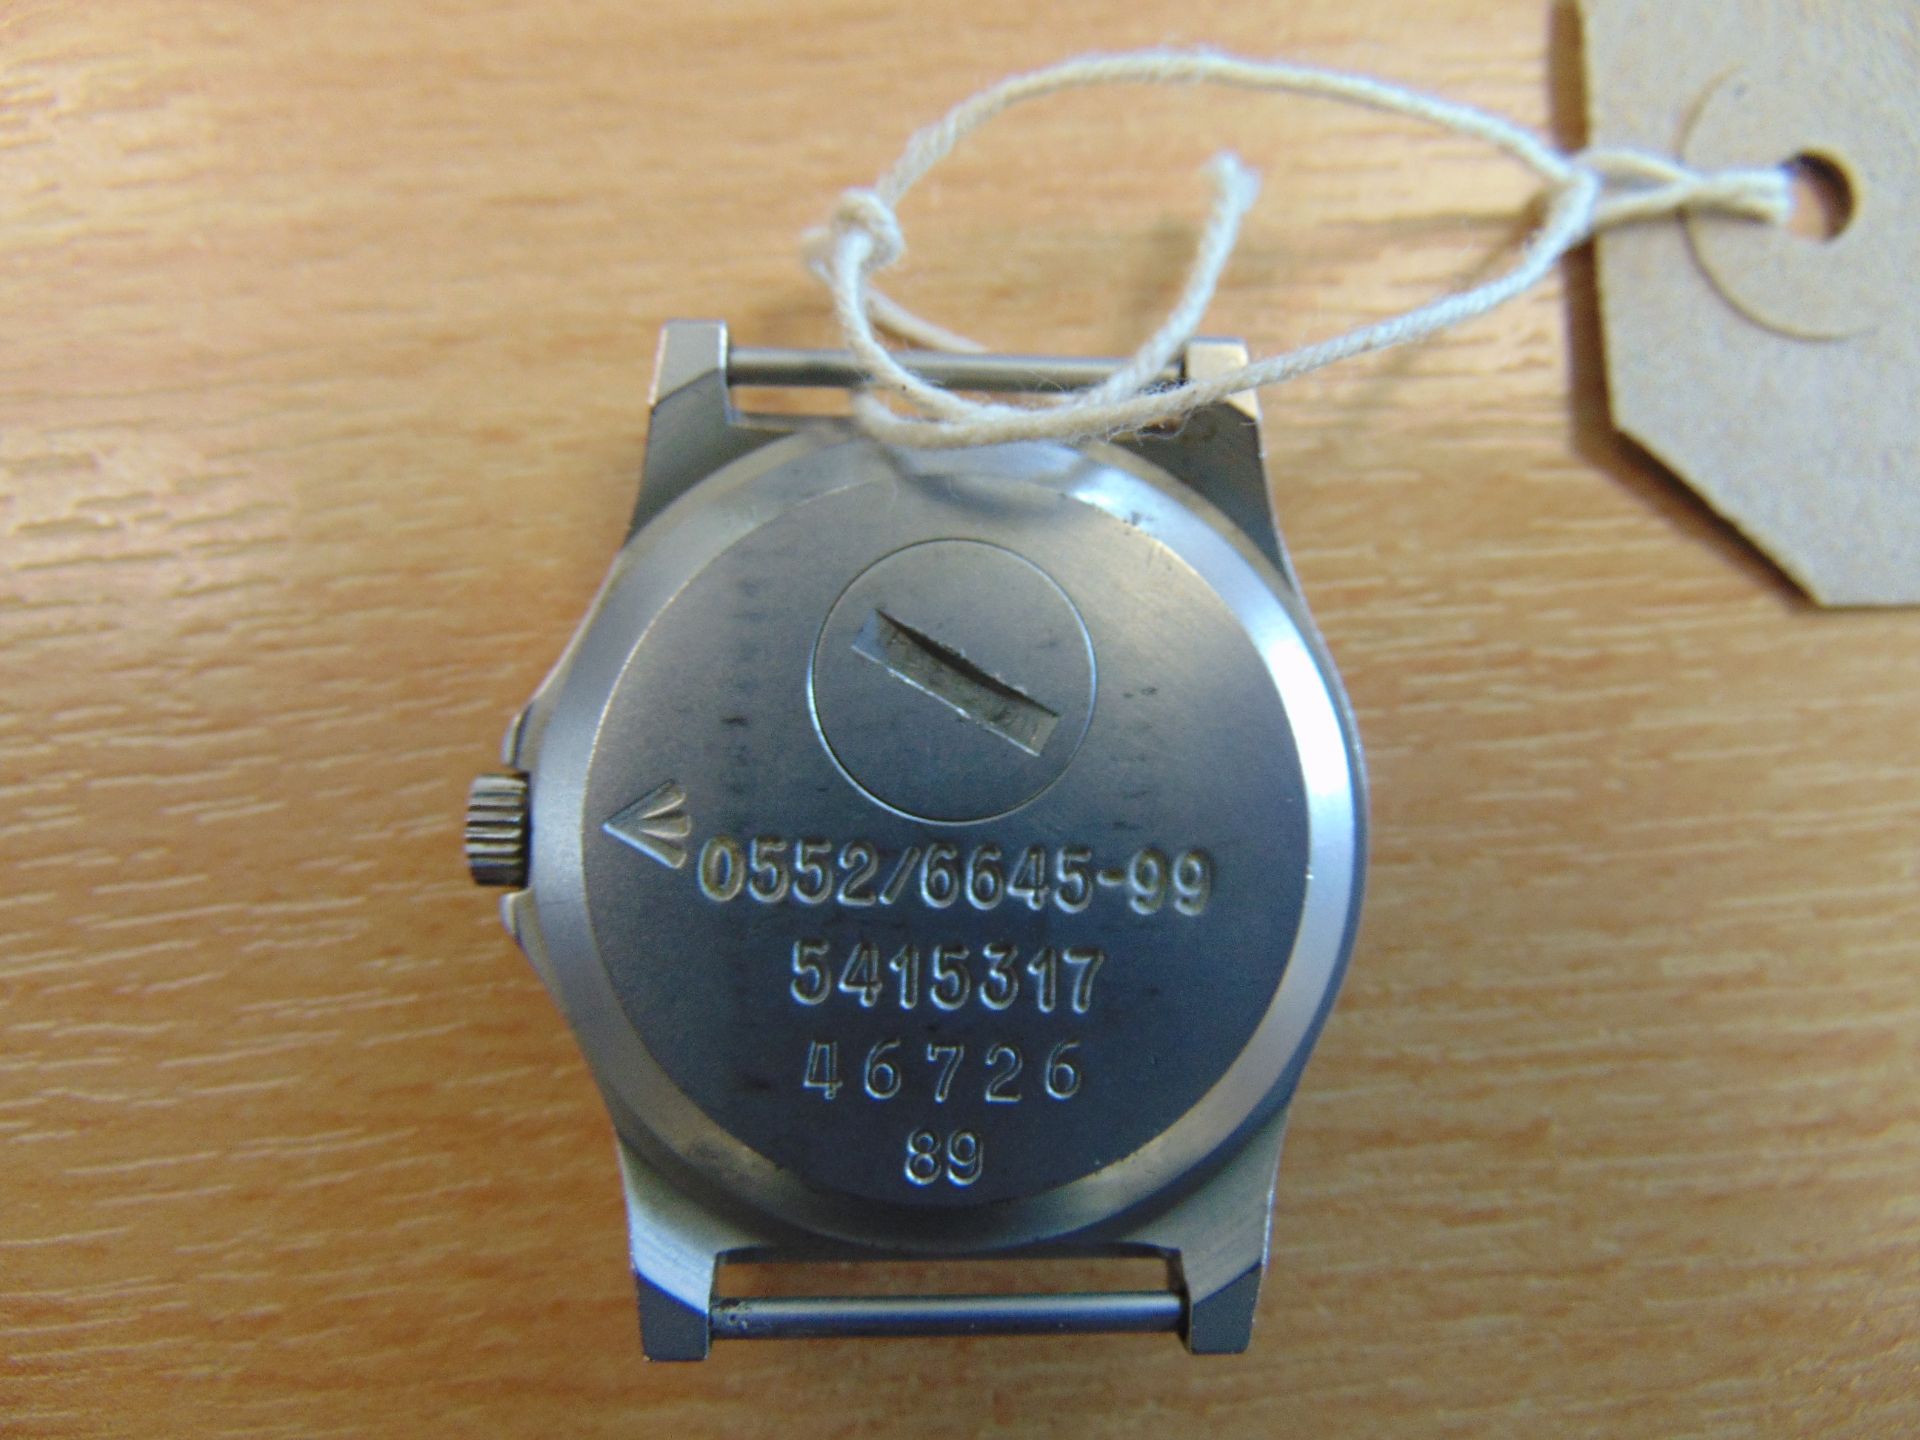 CWC 0552 Royal Marine / Navy Issue Service Watch Nato Marks, Date 1989 - Image 3 of 4